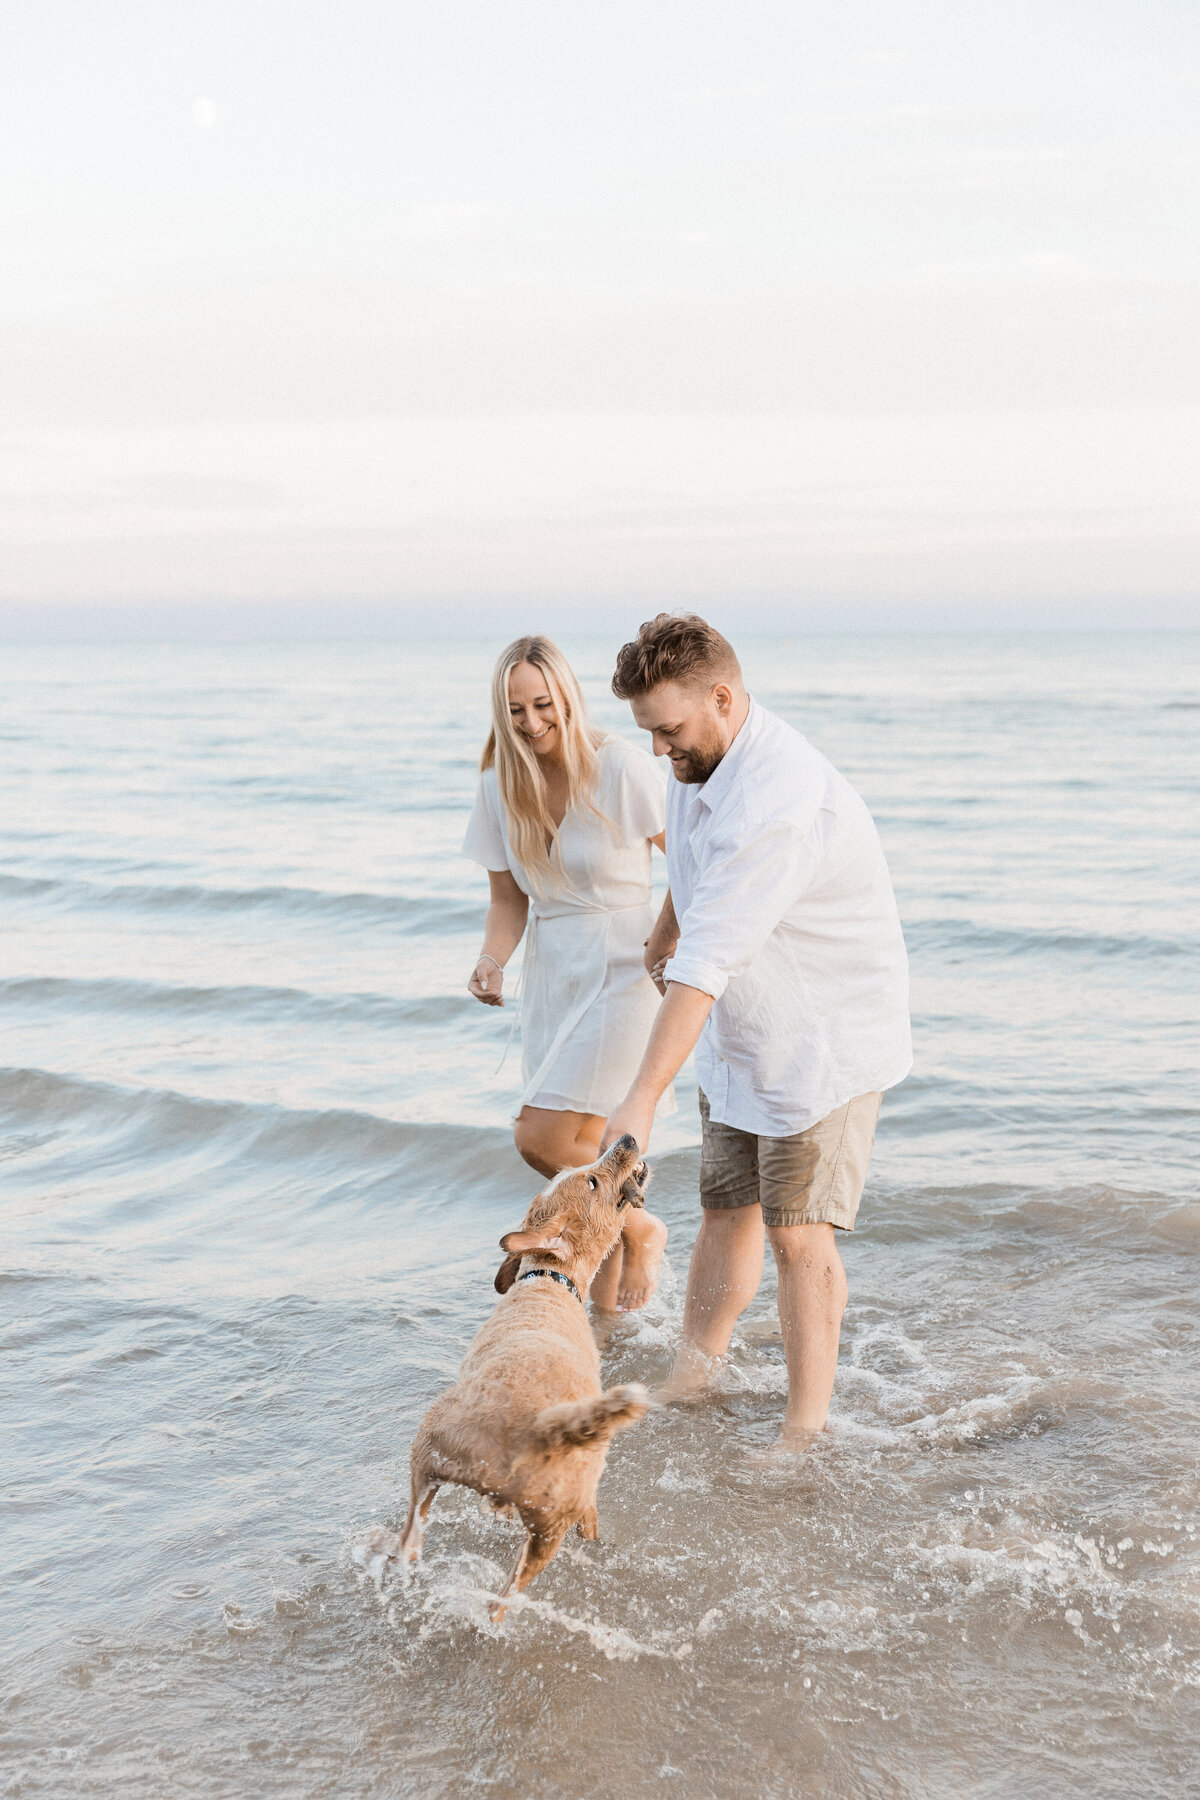 Couple playing at the beach with their dog